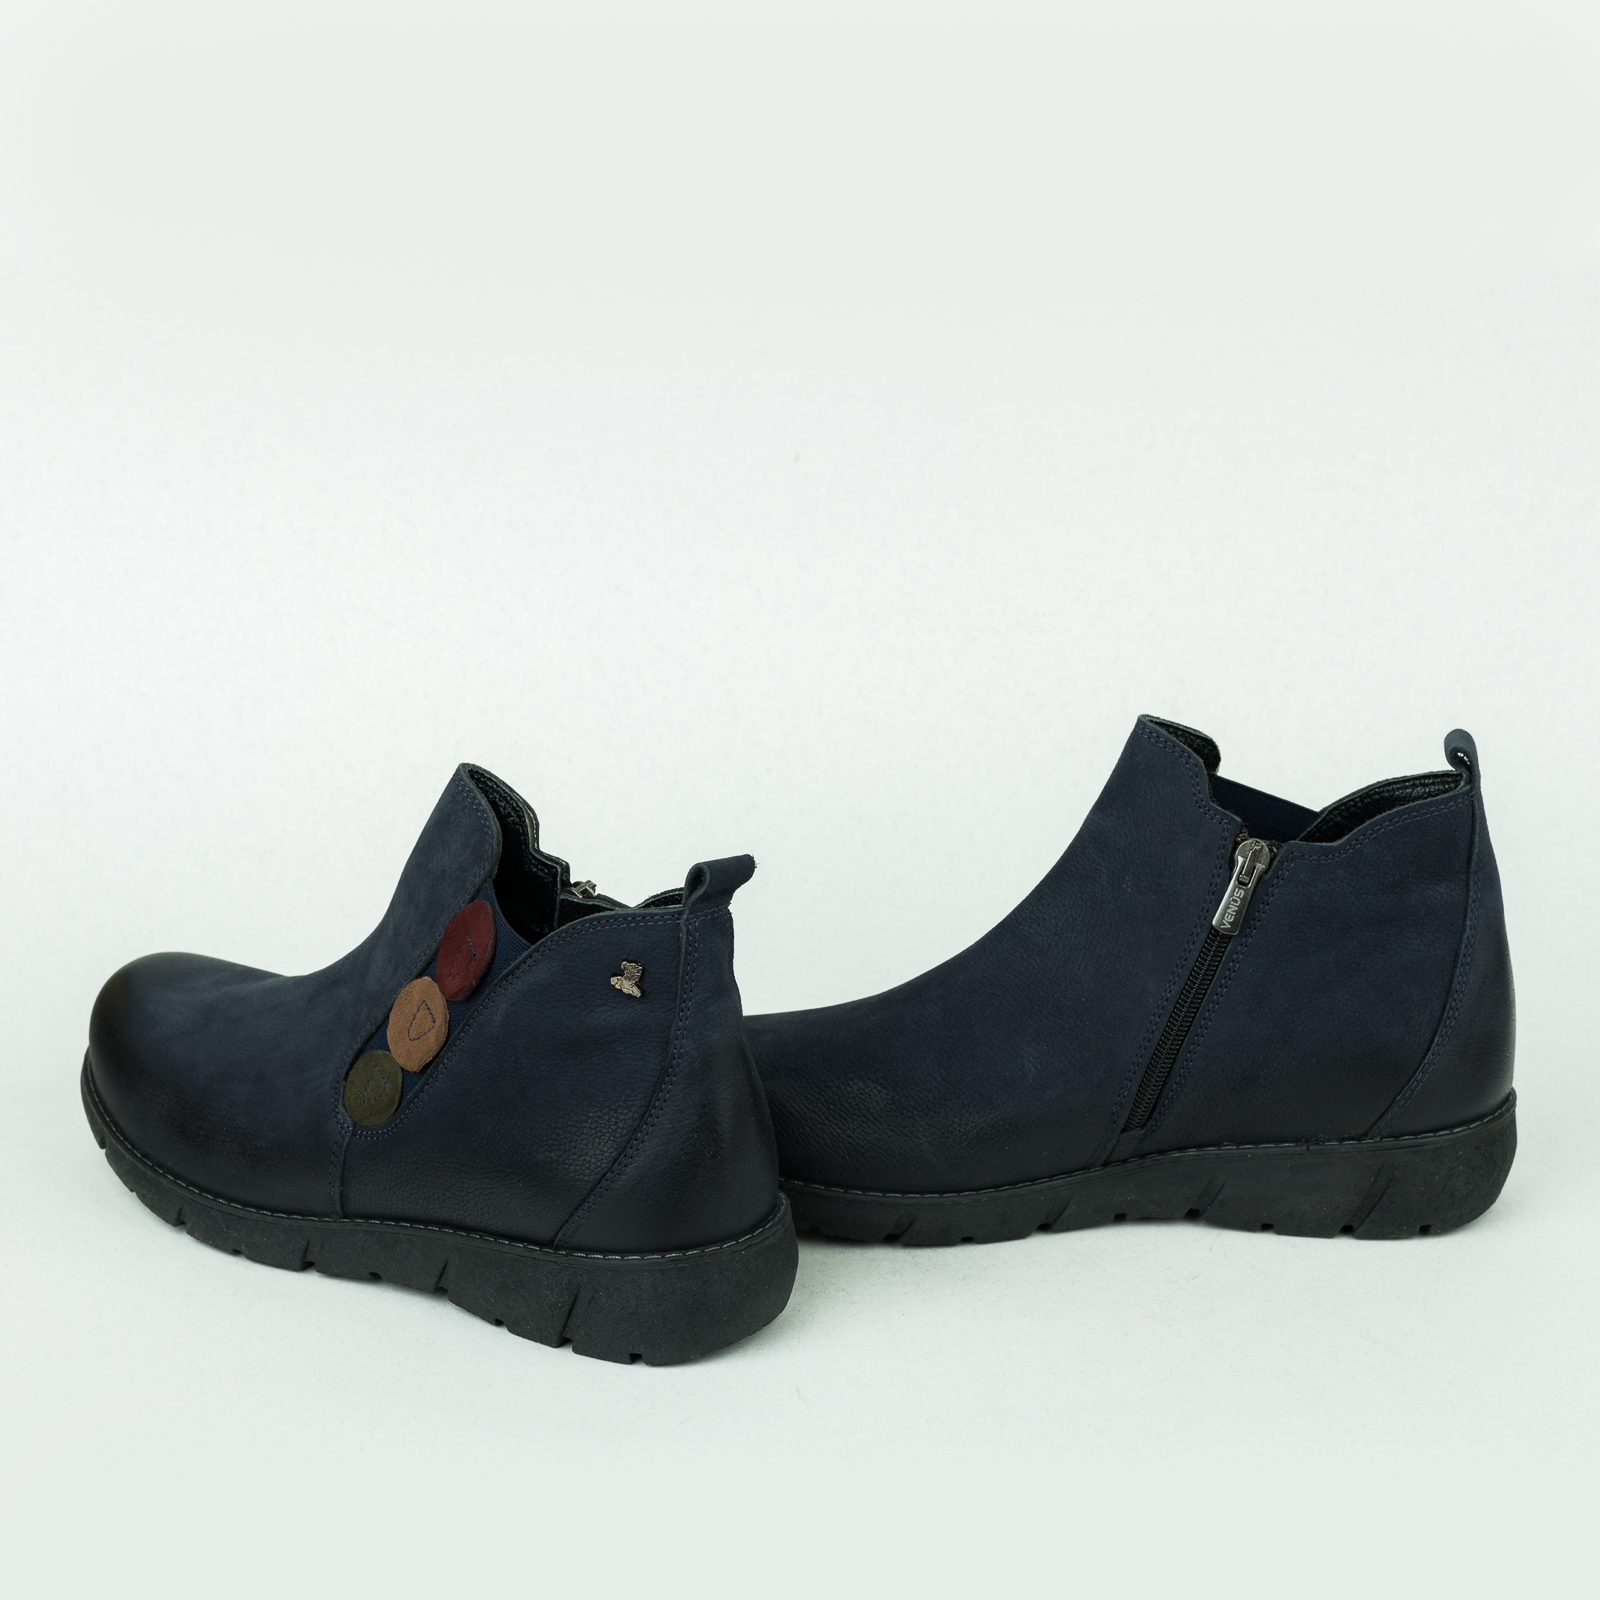 Leather ankle boots B070 - NAVY